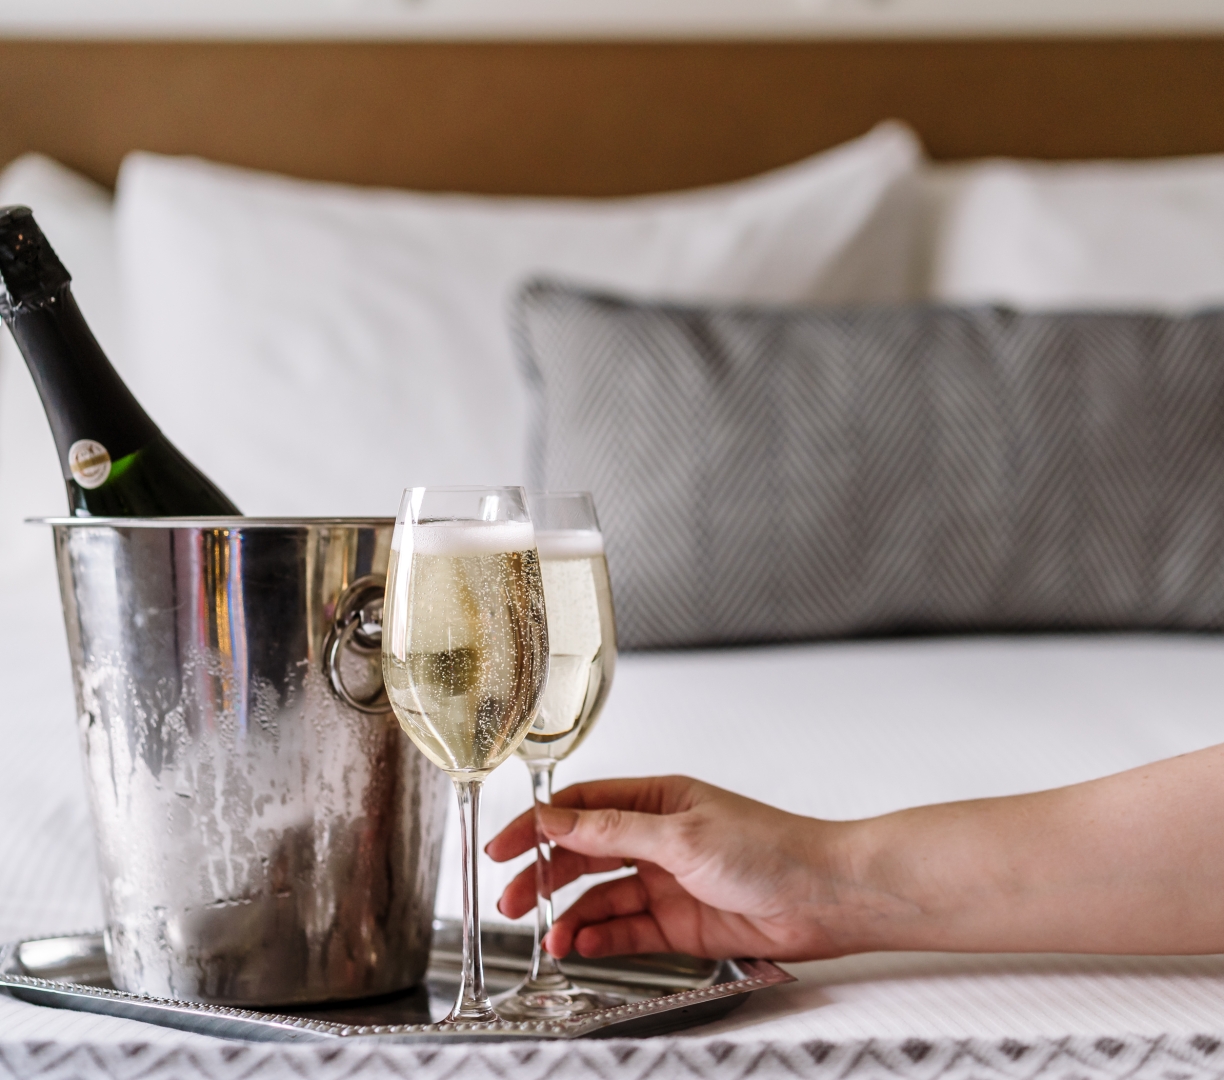 A silver tray with glasses and a bottle of champagne in an ice bucket on a hotel bed.